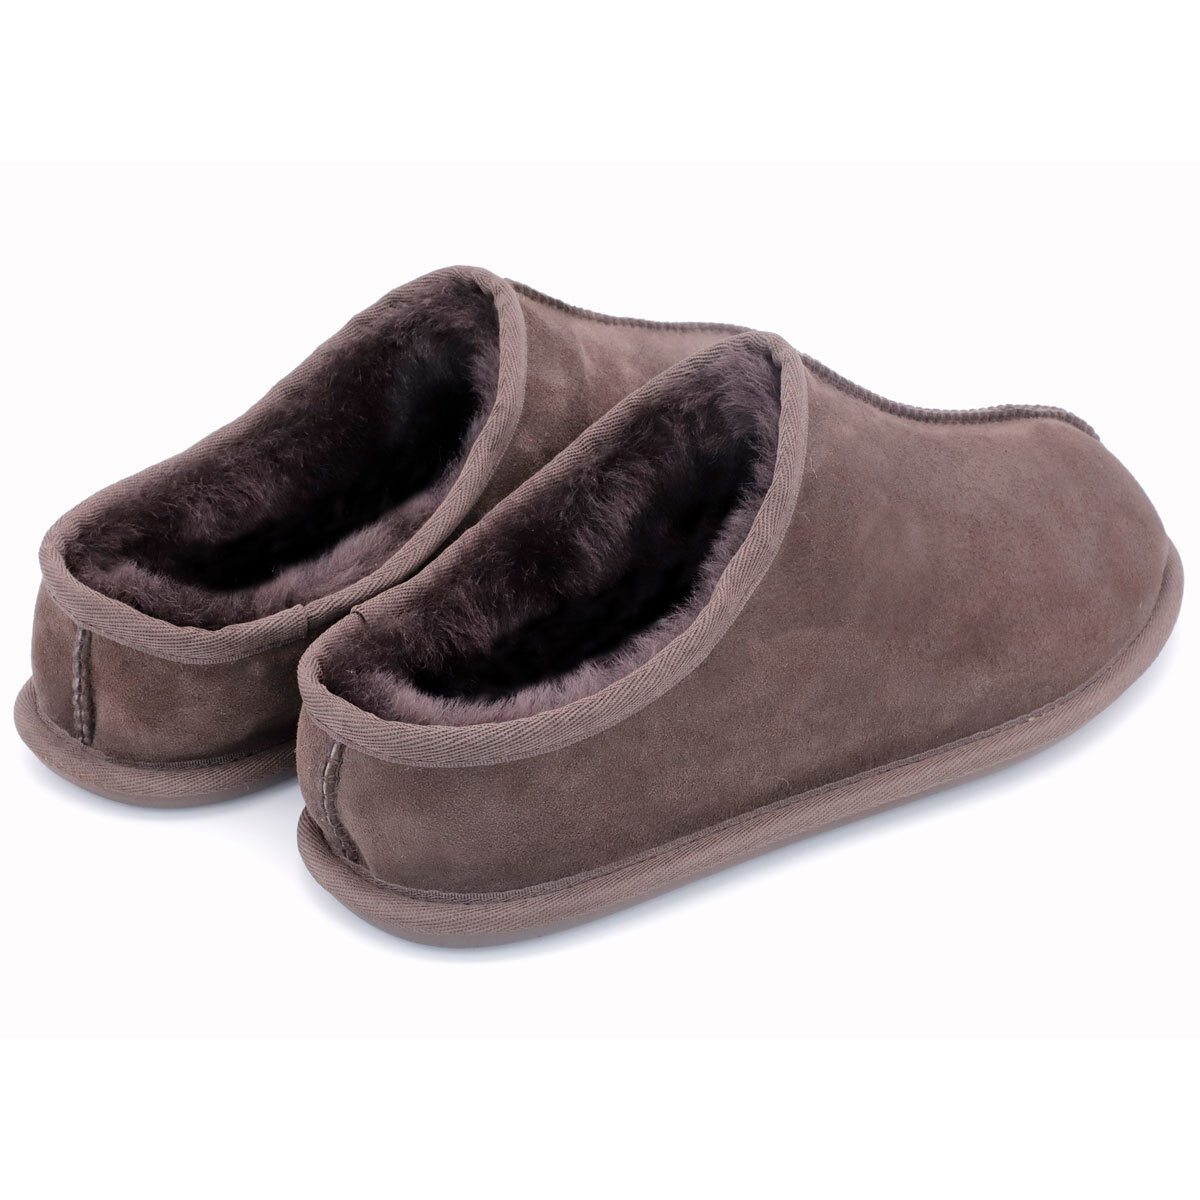 Kirkland Signature Men's Clog Shearling Slippers in Chocolate, Size 9